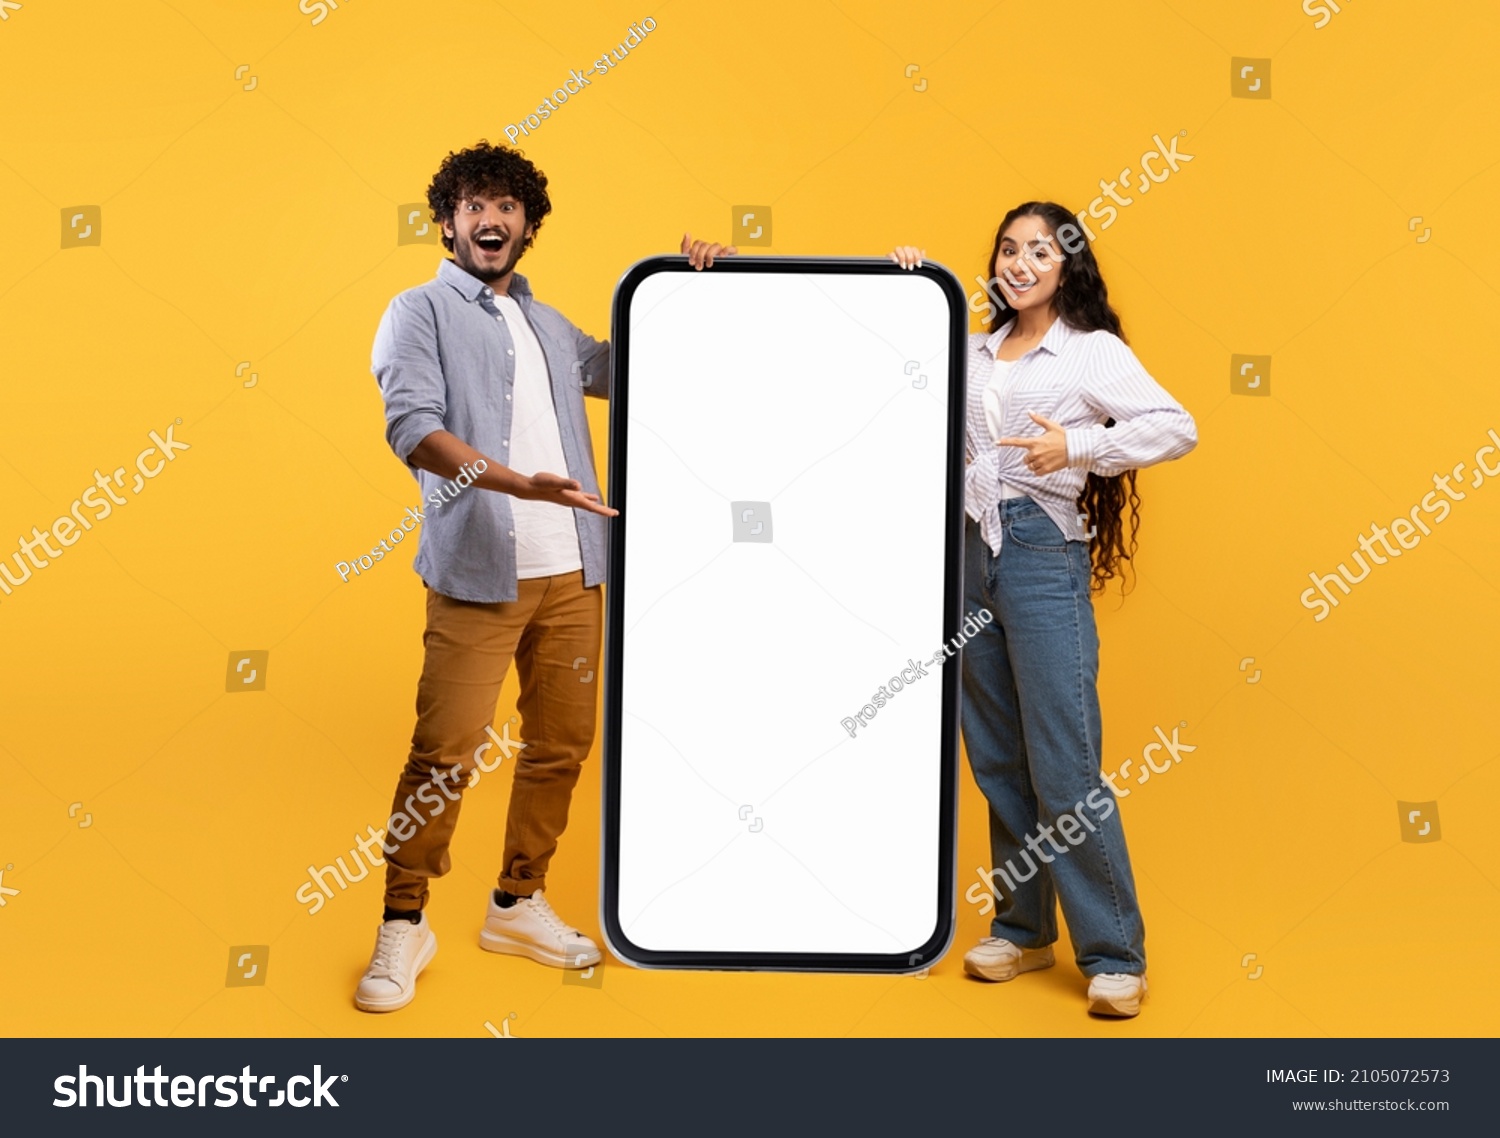 Cool mobile offer. Happy indian couple pointing at big cellphone with white screen for mockup, demonstrating free space for phone application or website design, yellow background #2105072573